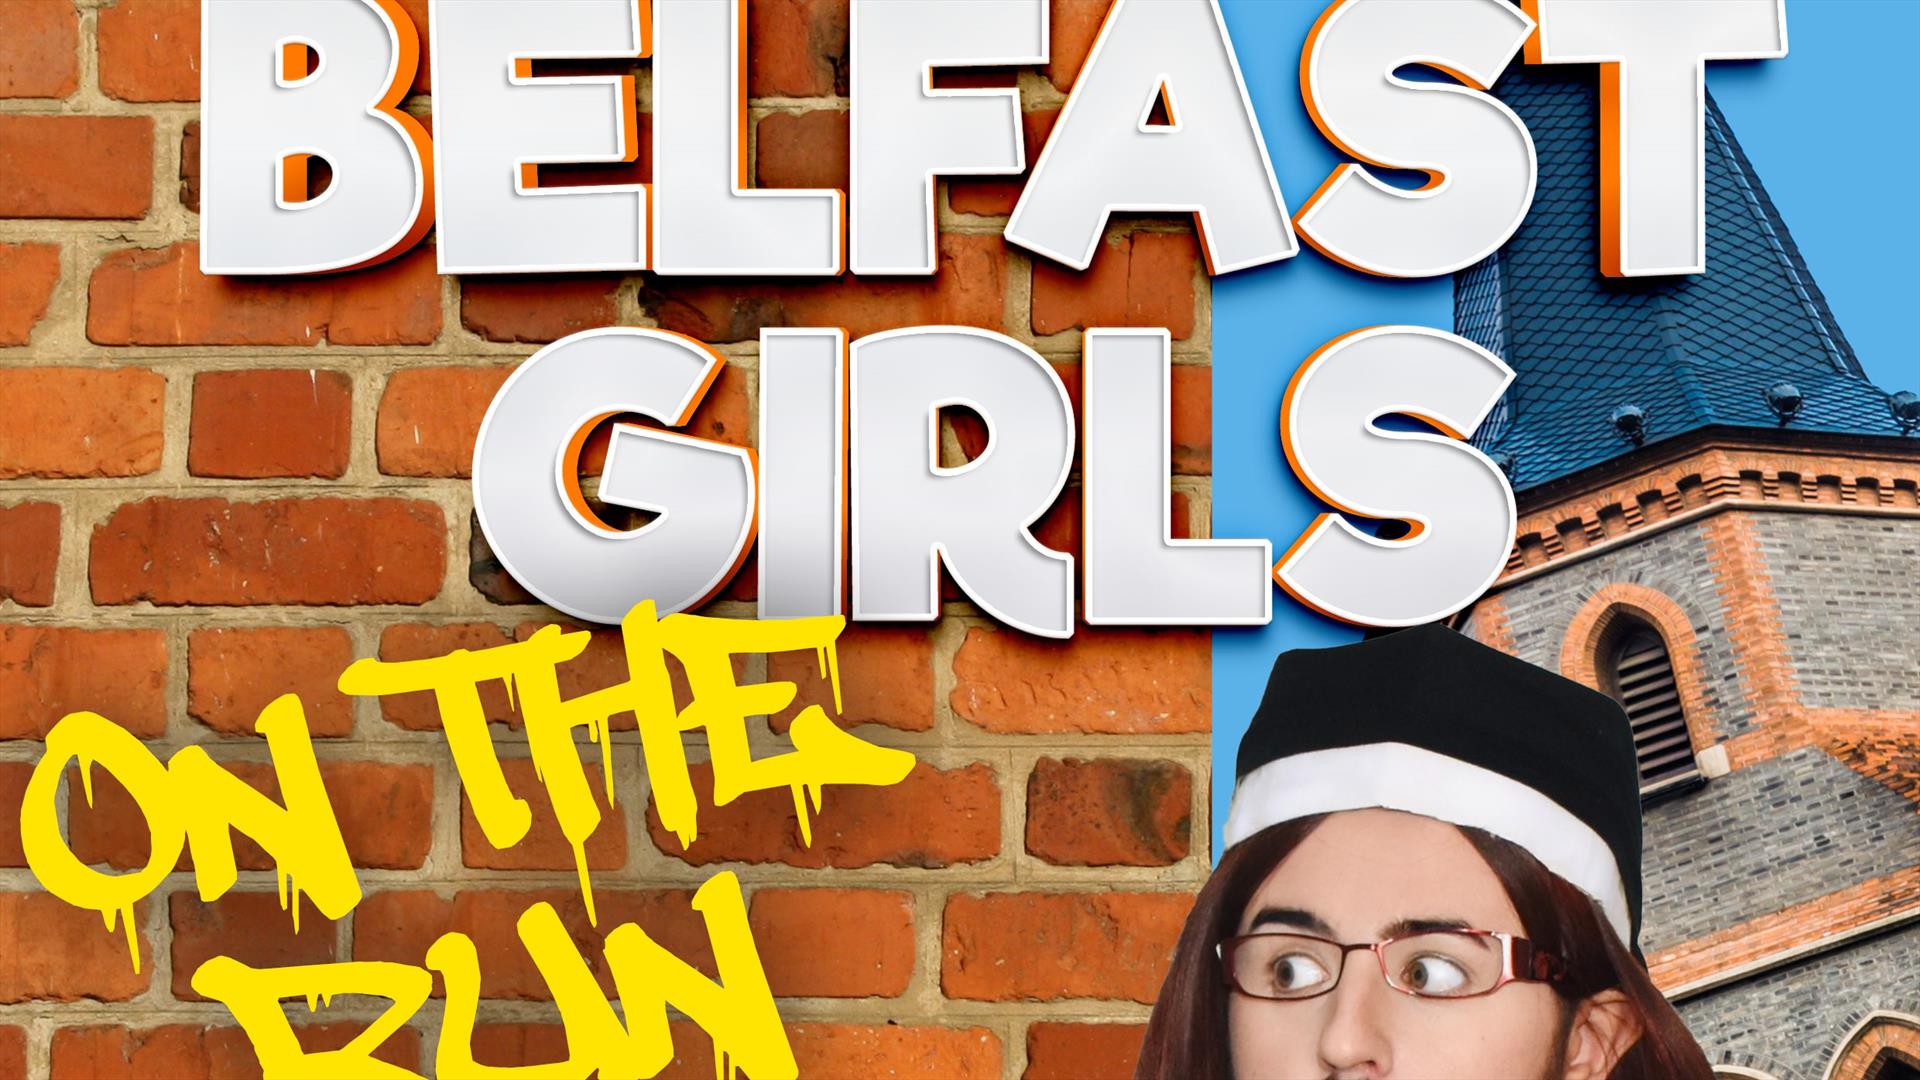 Poster promoting the 'Belfast Girls on the Run!' at Down Arts Centre, Downpatrick.